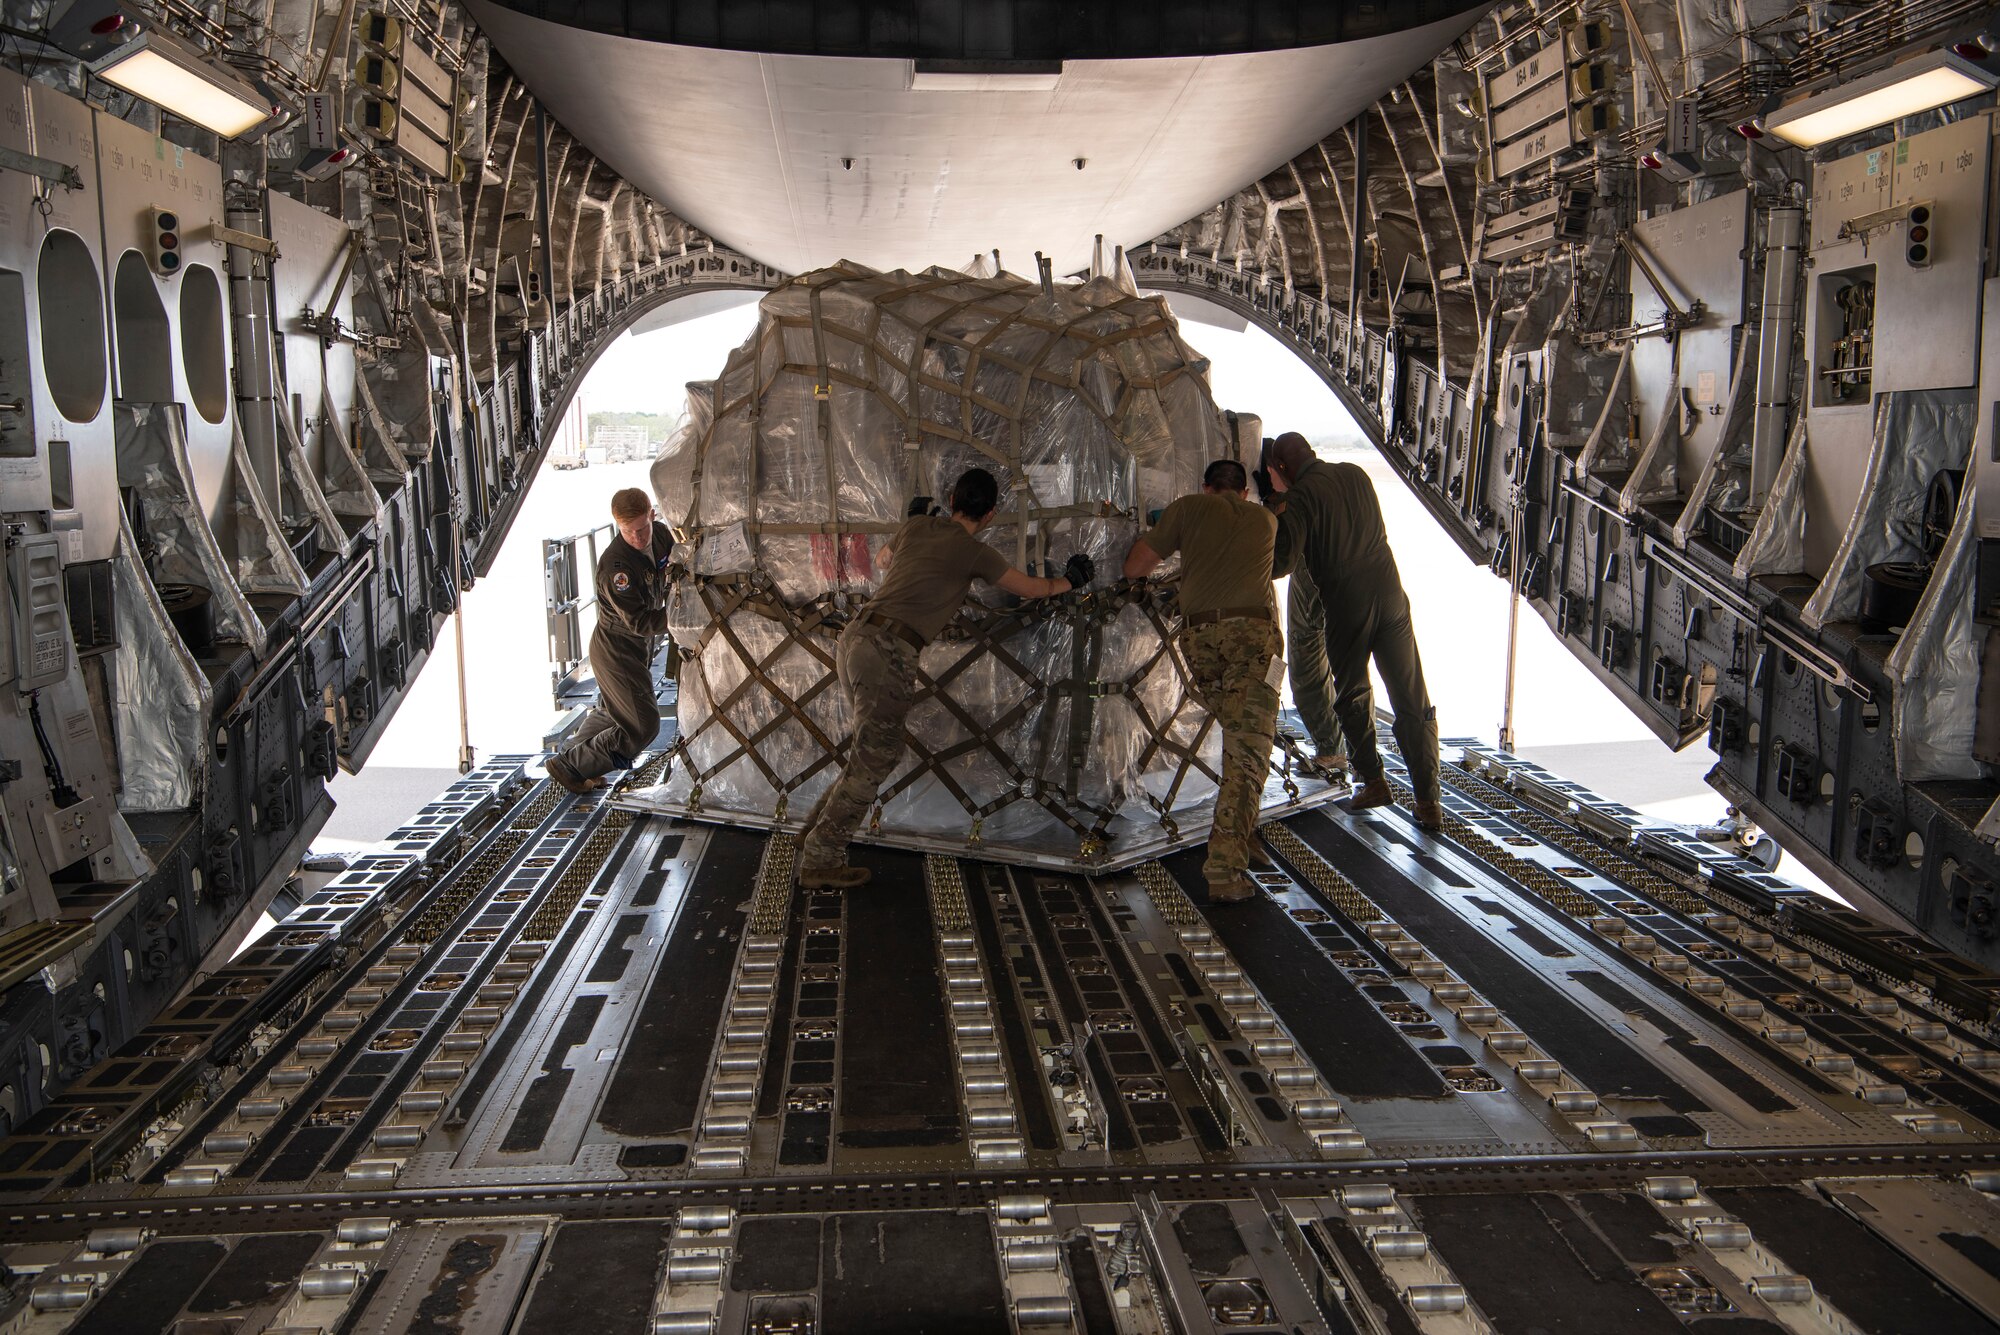 Air Force Reserve aircrew members offload food and medical supplies from the rear of a C-17 Globemaster III aircraft at Soto Cano Air Base, Honduras, as part of a weekend combined aircrew training and humanitarian delivery mission in Central America, Feb. 13, 2022. Reserve Citizen Airmen from Joint Base Charleston’s 315th Airlift Wing flew in over 54,000 pounds of donated cargo to the base, all of which is destined for distribution by local charities. (U.S. Air Force photo by Lt. Col. Wayne Capps)